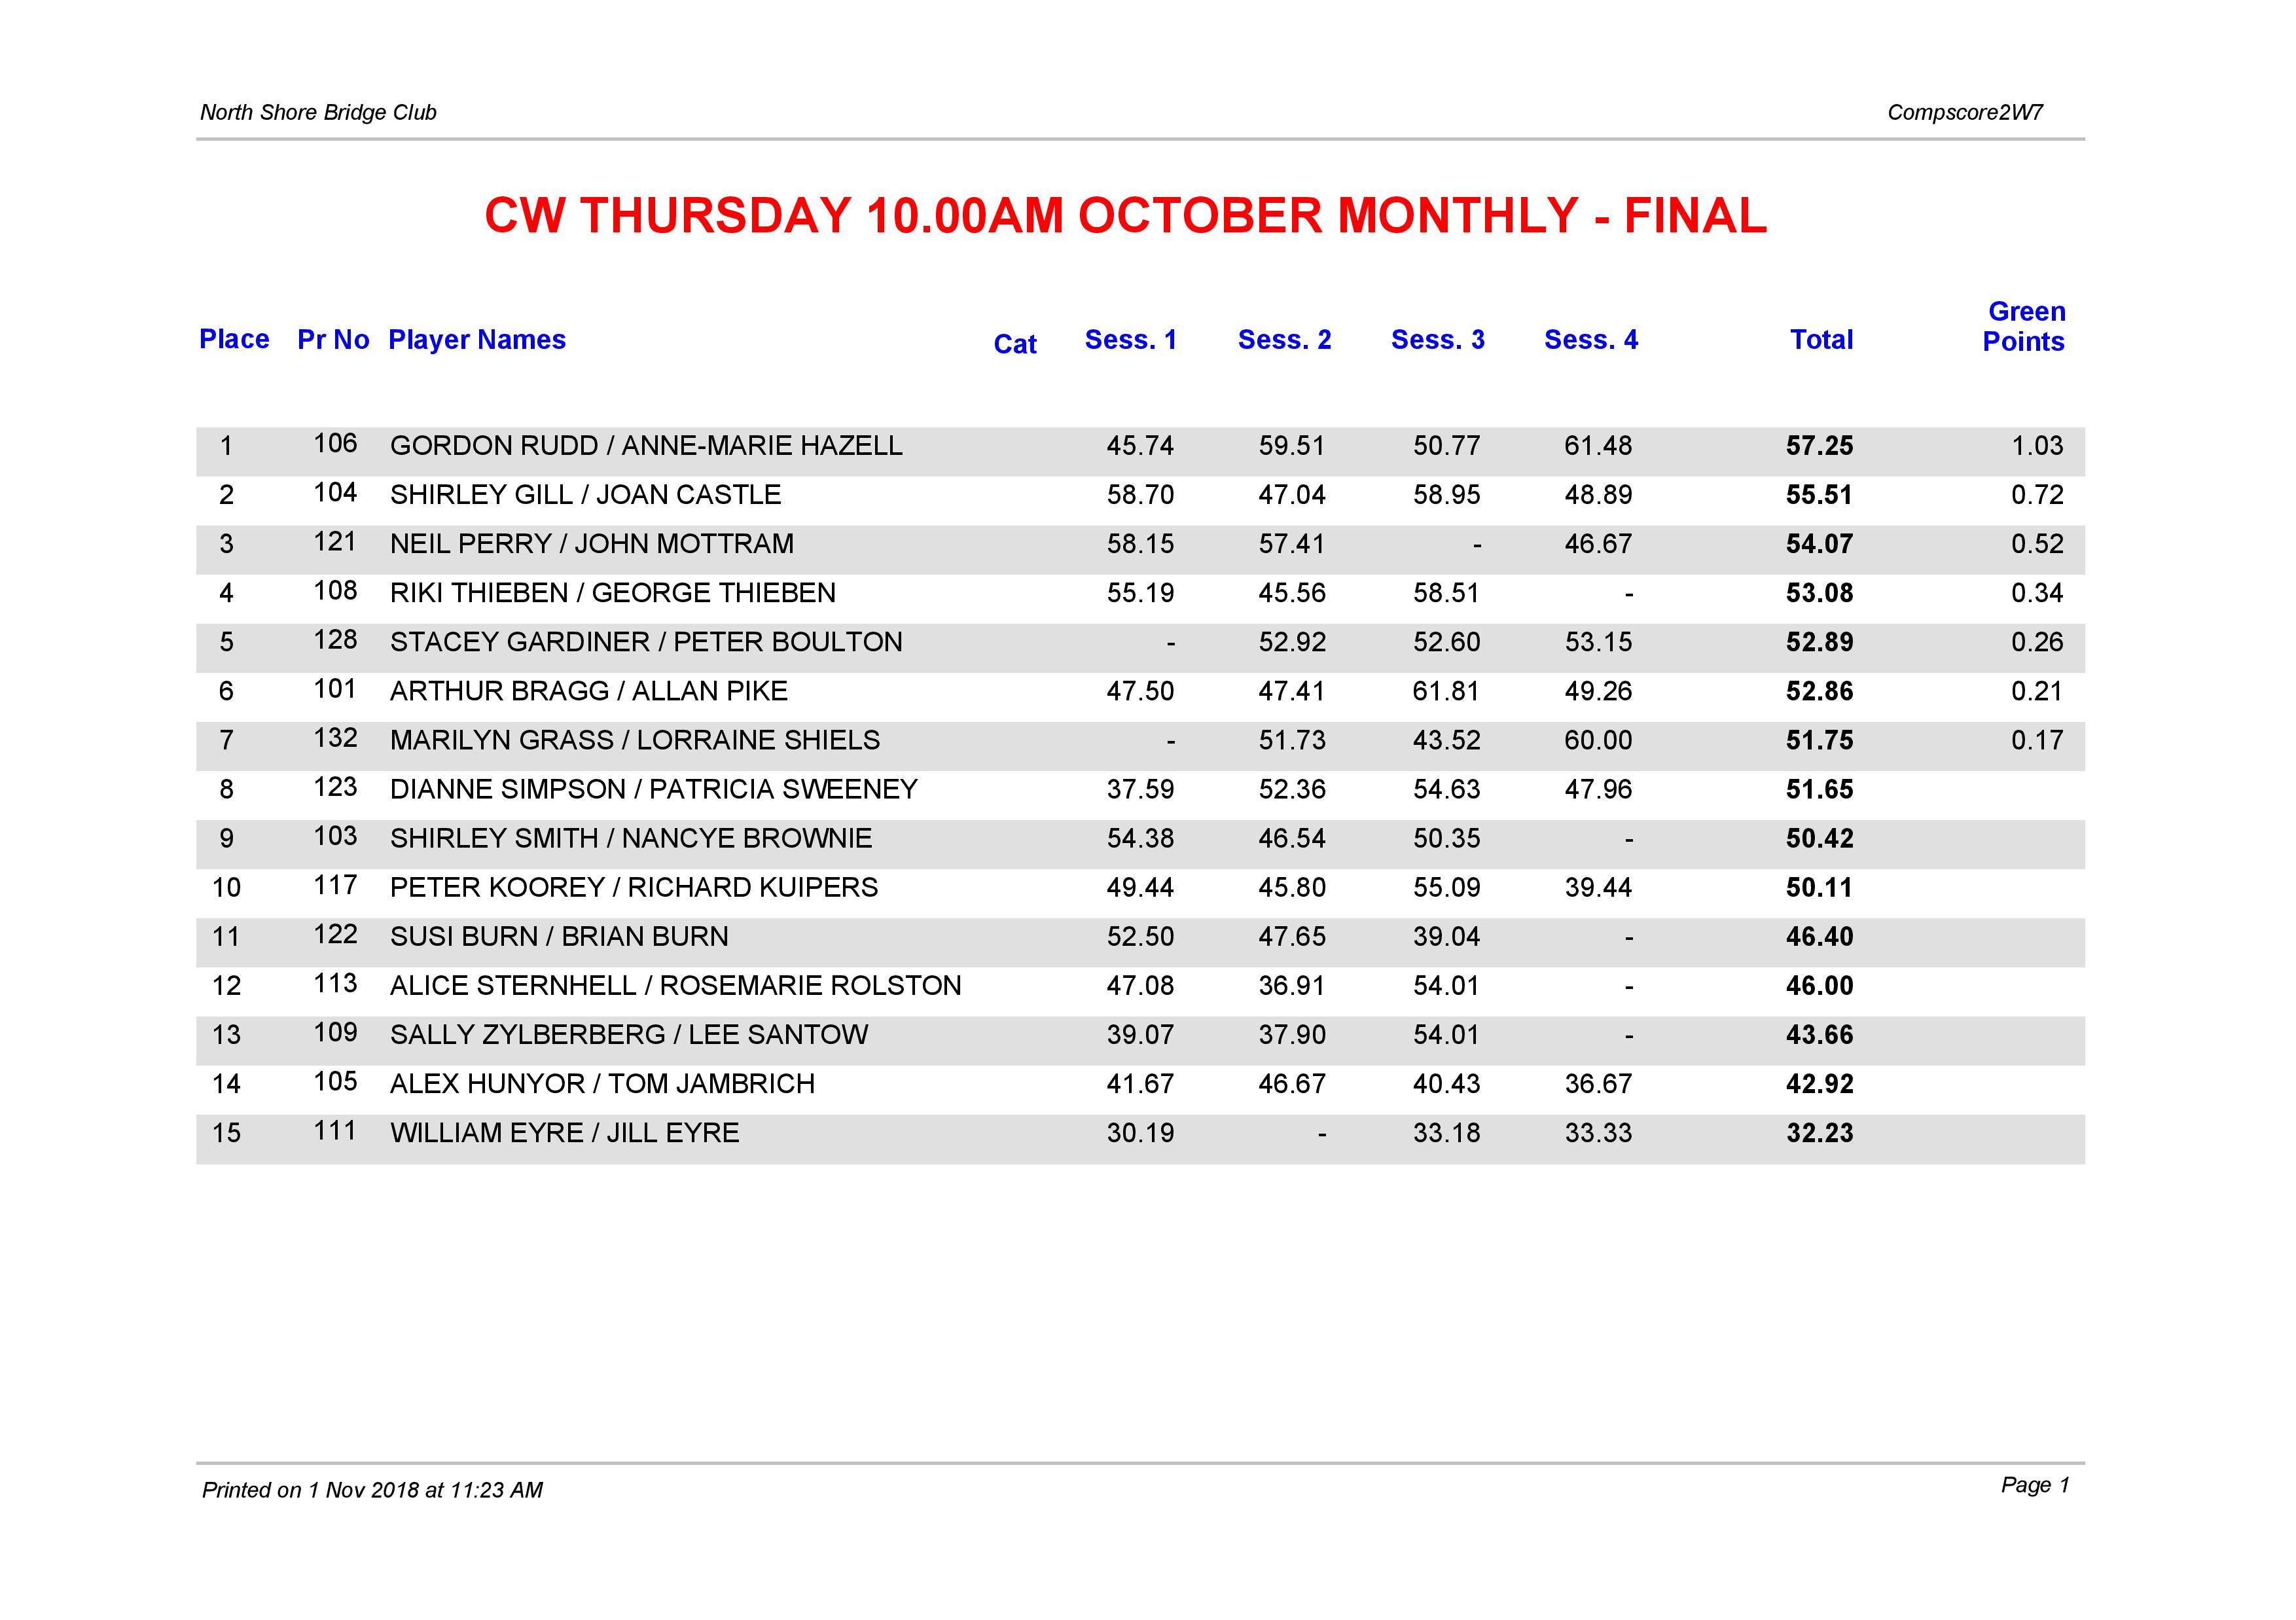 CW Thursday 10.00am Open October Monthly